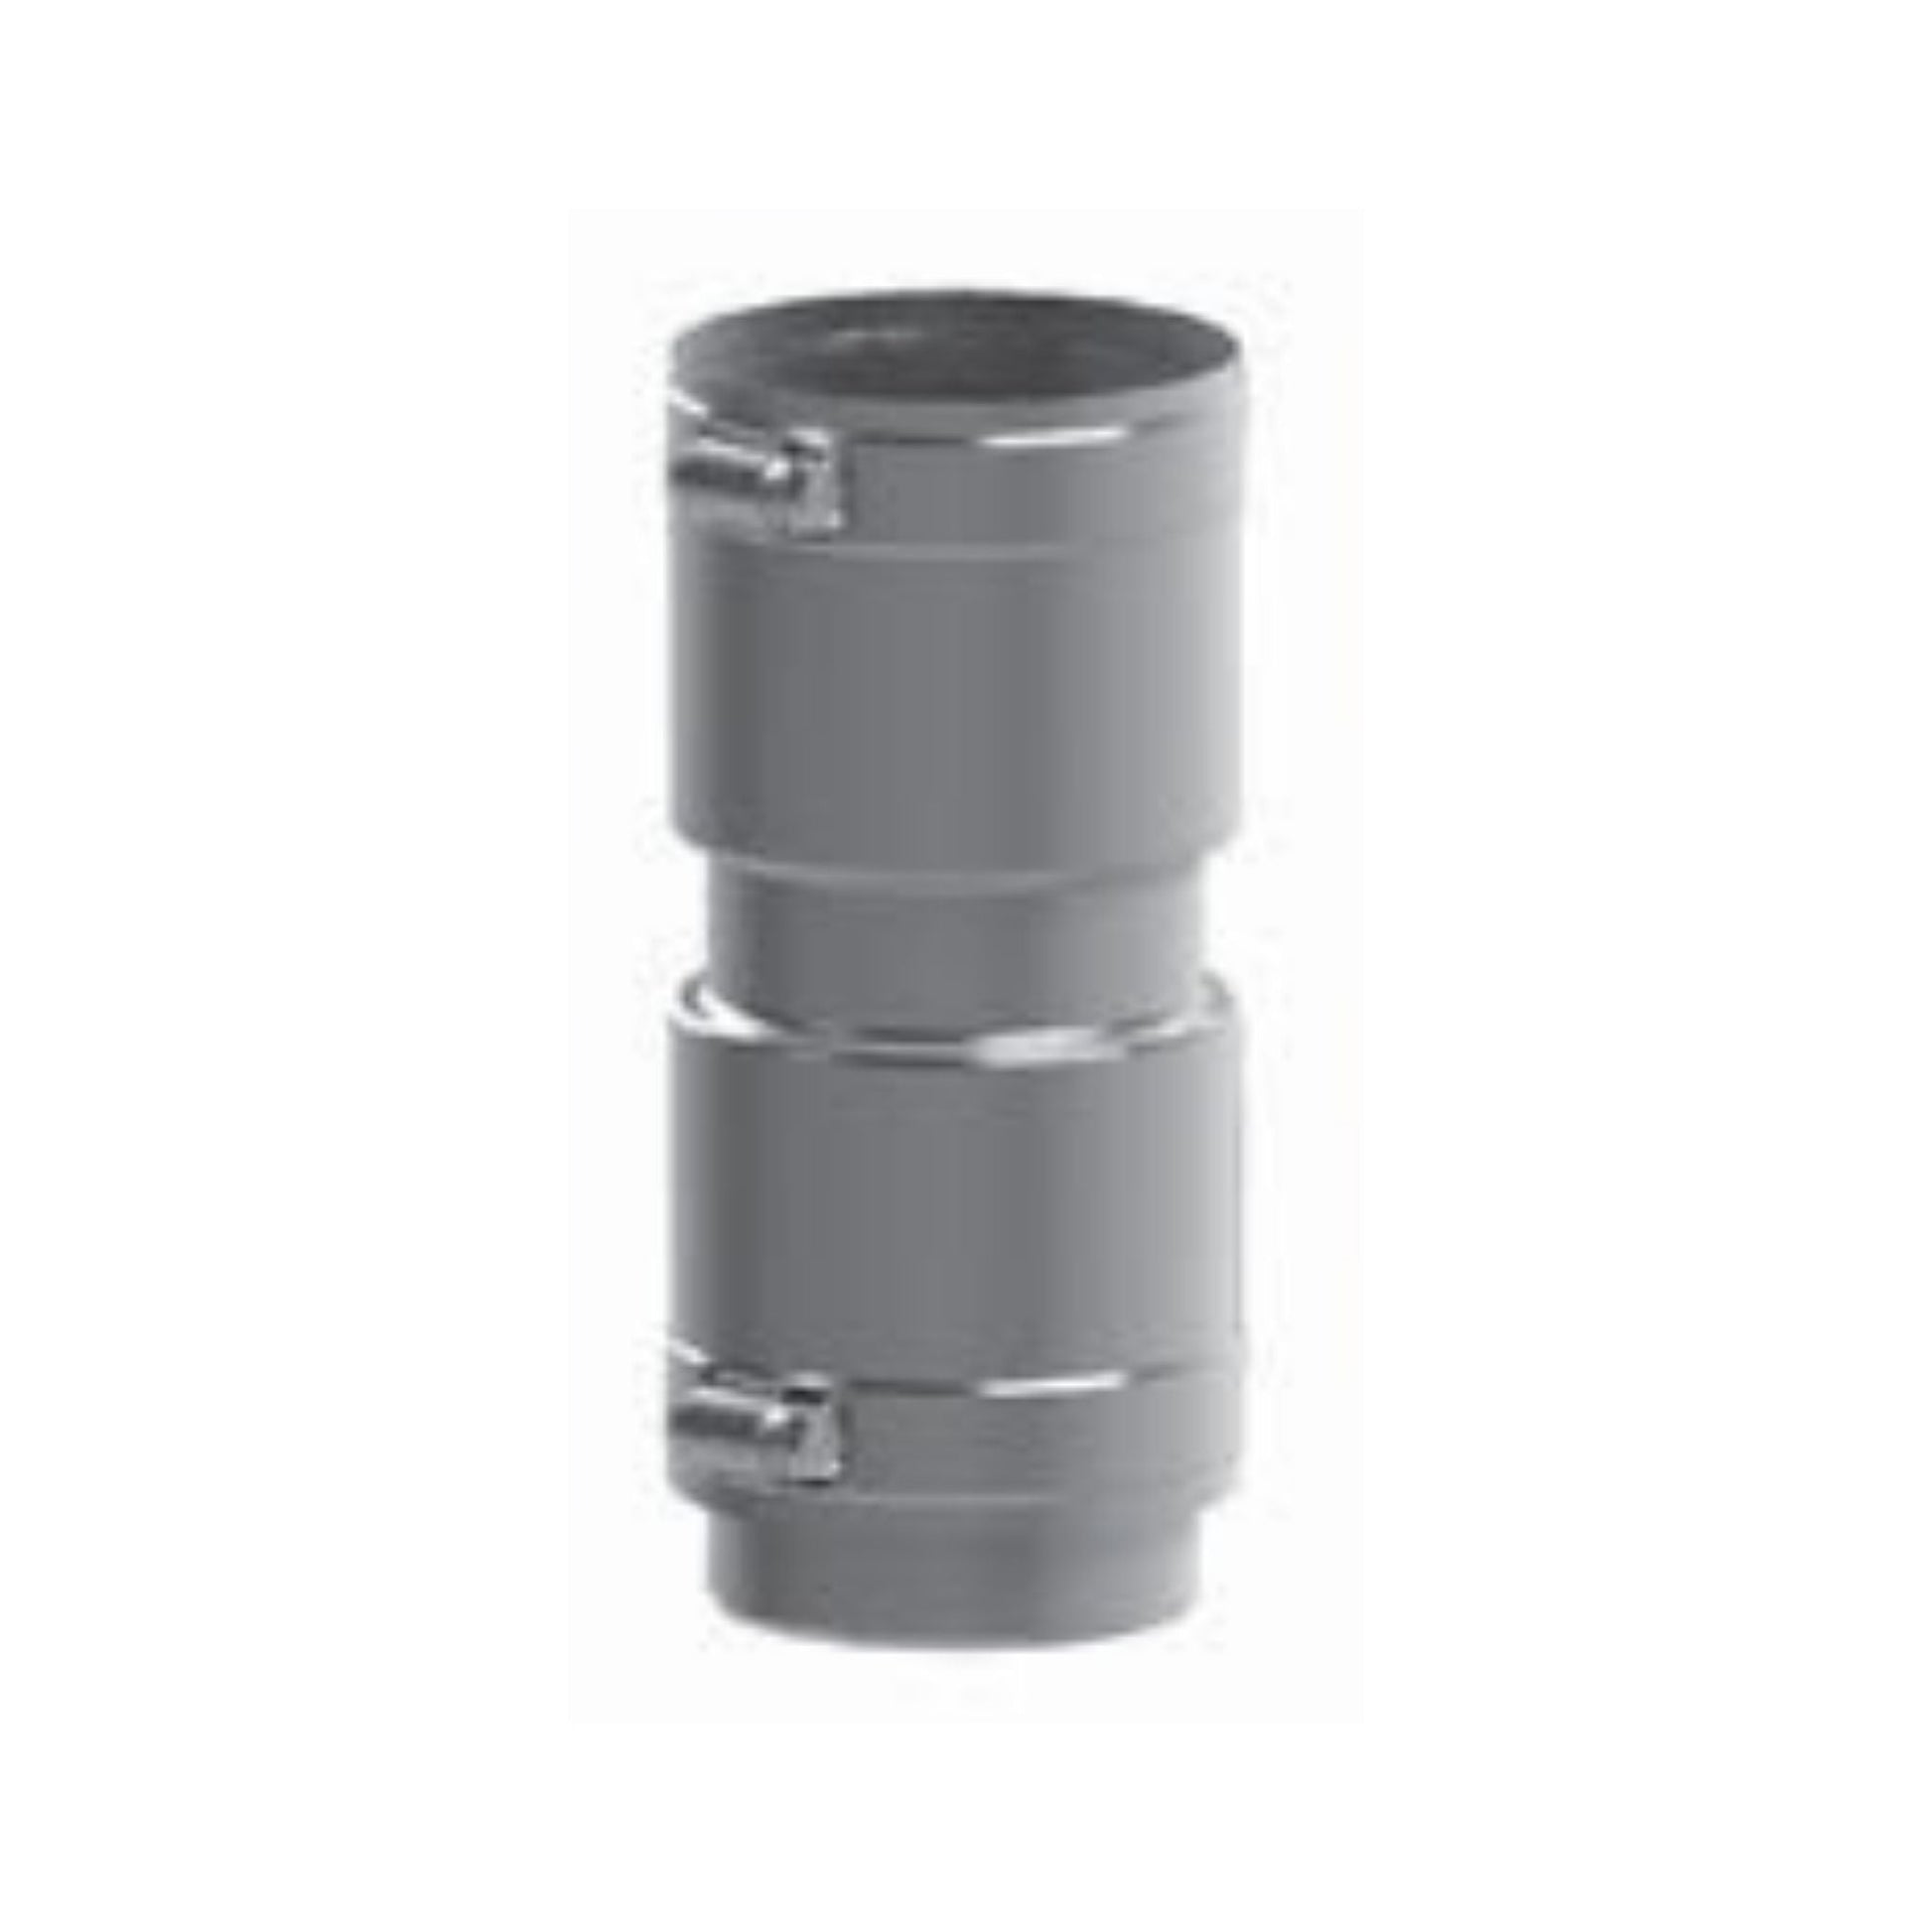 DuraVent FasNSeal Flex 2" Stainless Steel Coupler